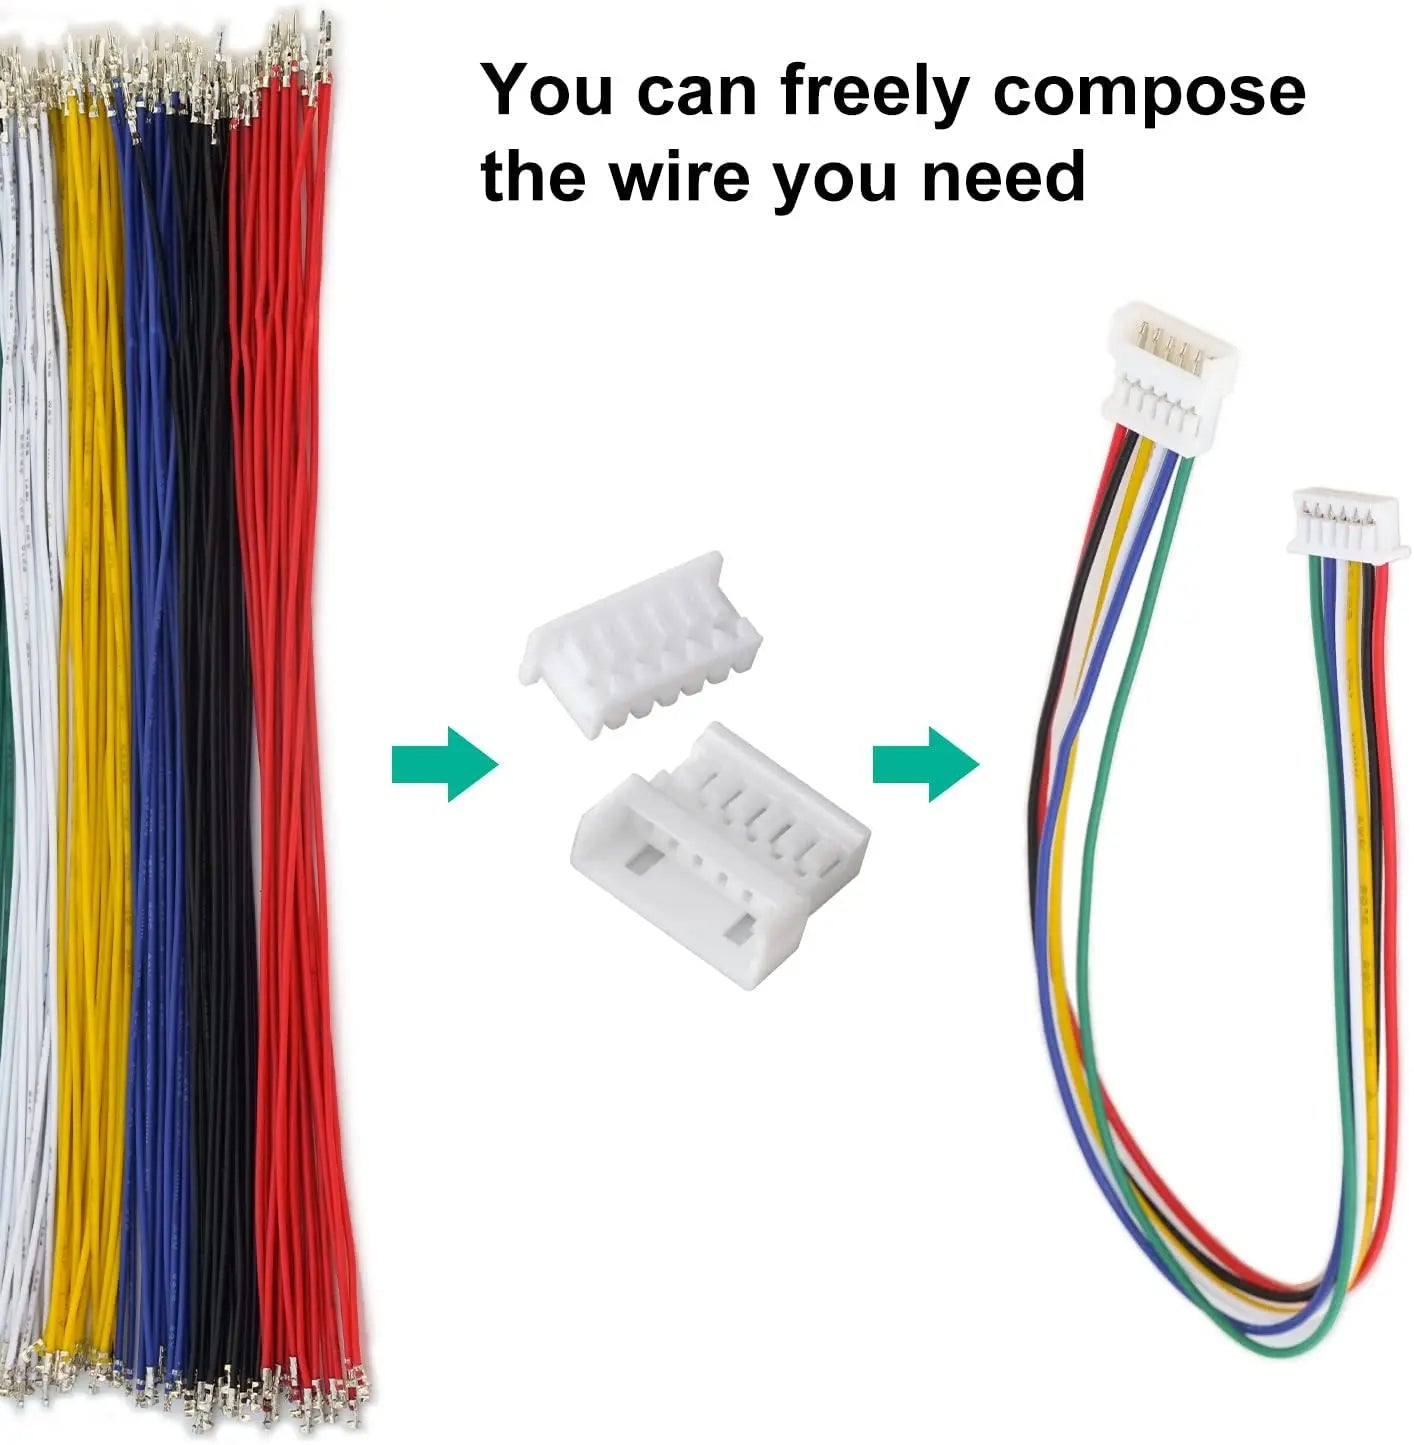 You can freely compose the wire you